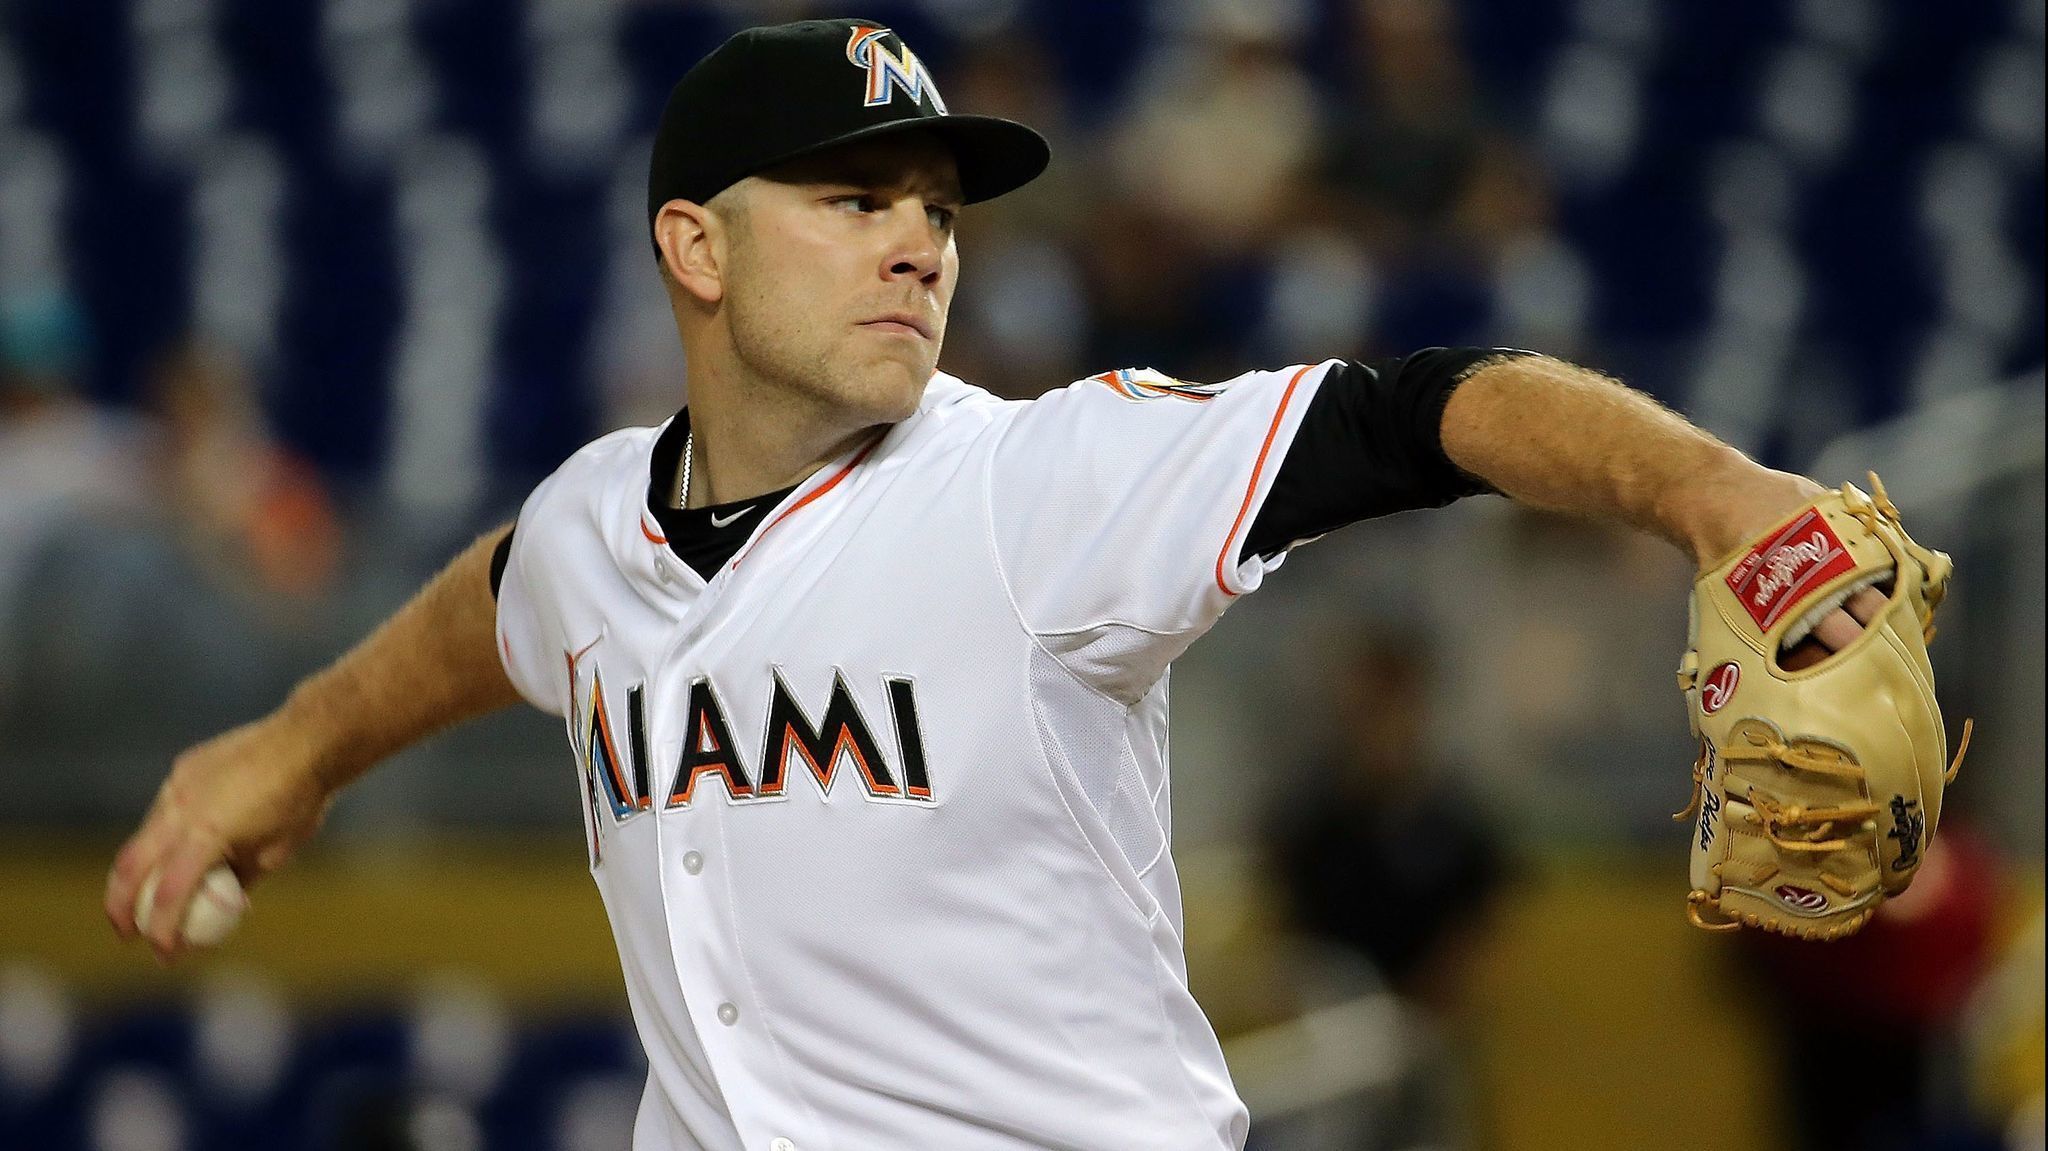 Who are the prospects the Marlins got for David Phelps?